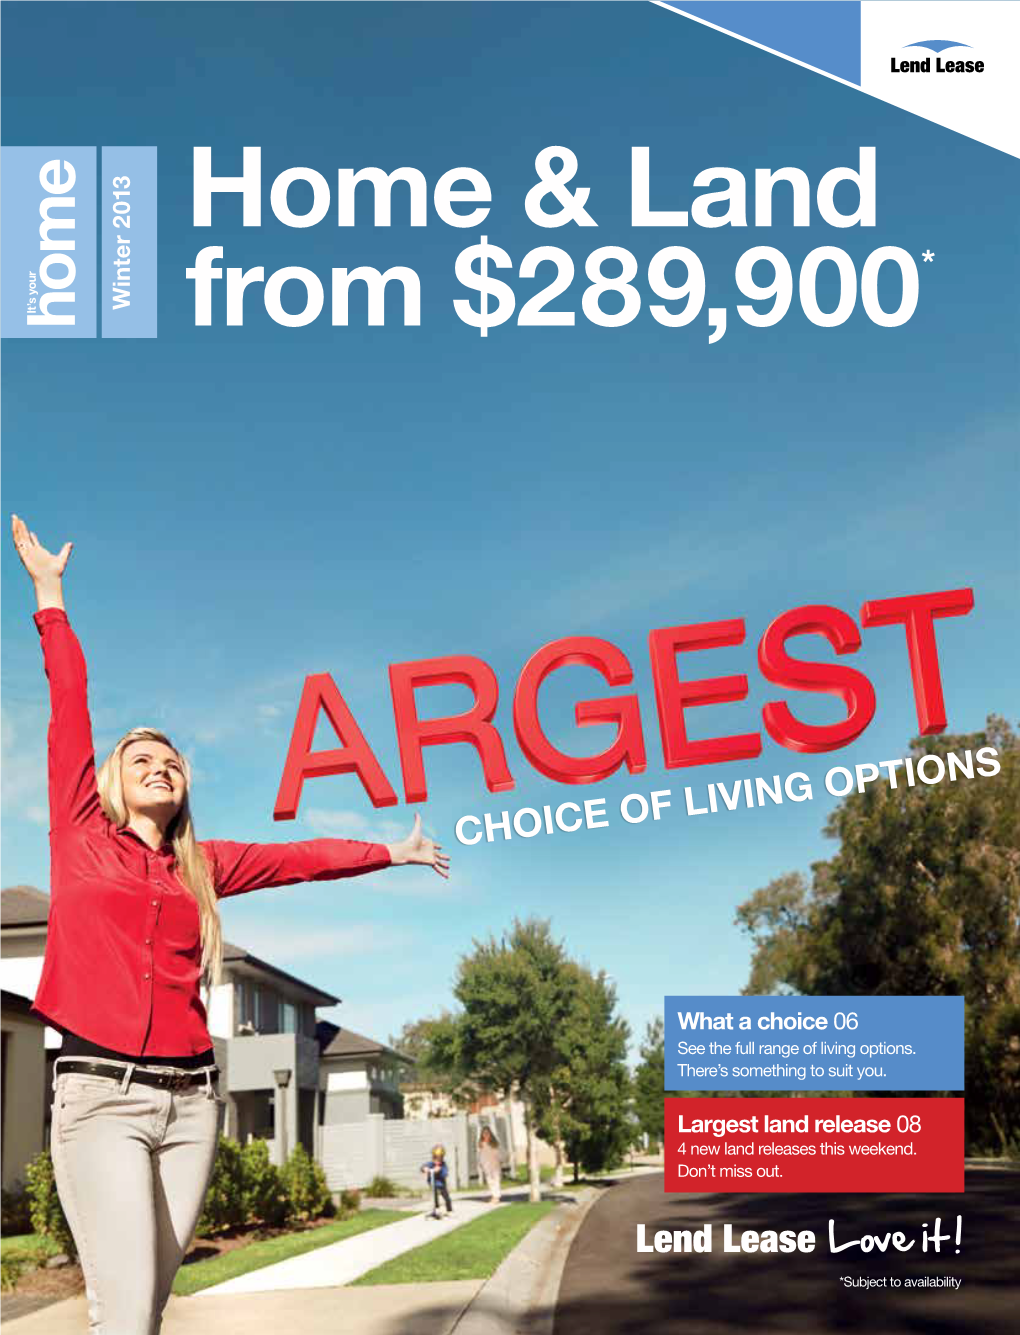 Home & Land from $289,900*